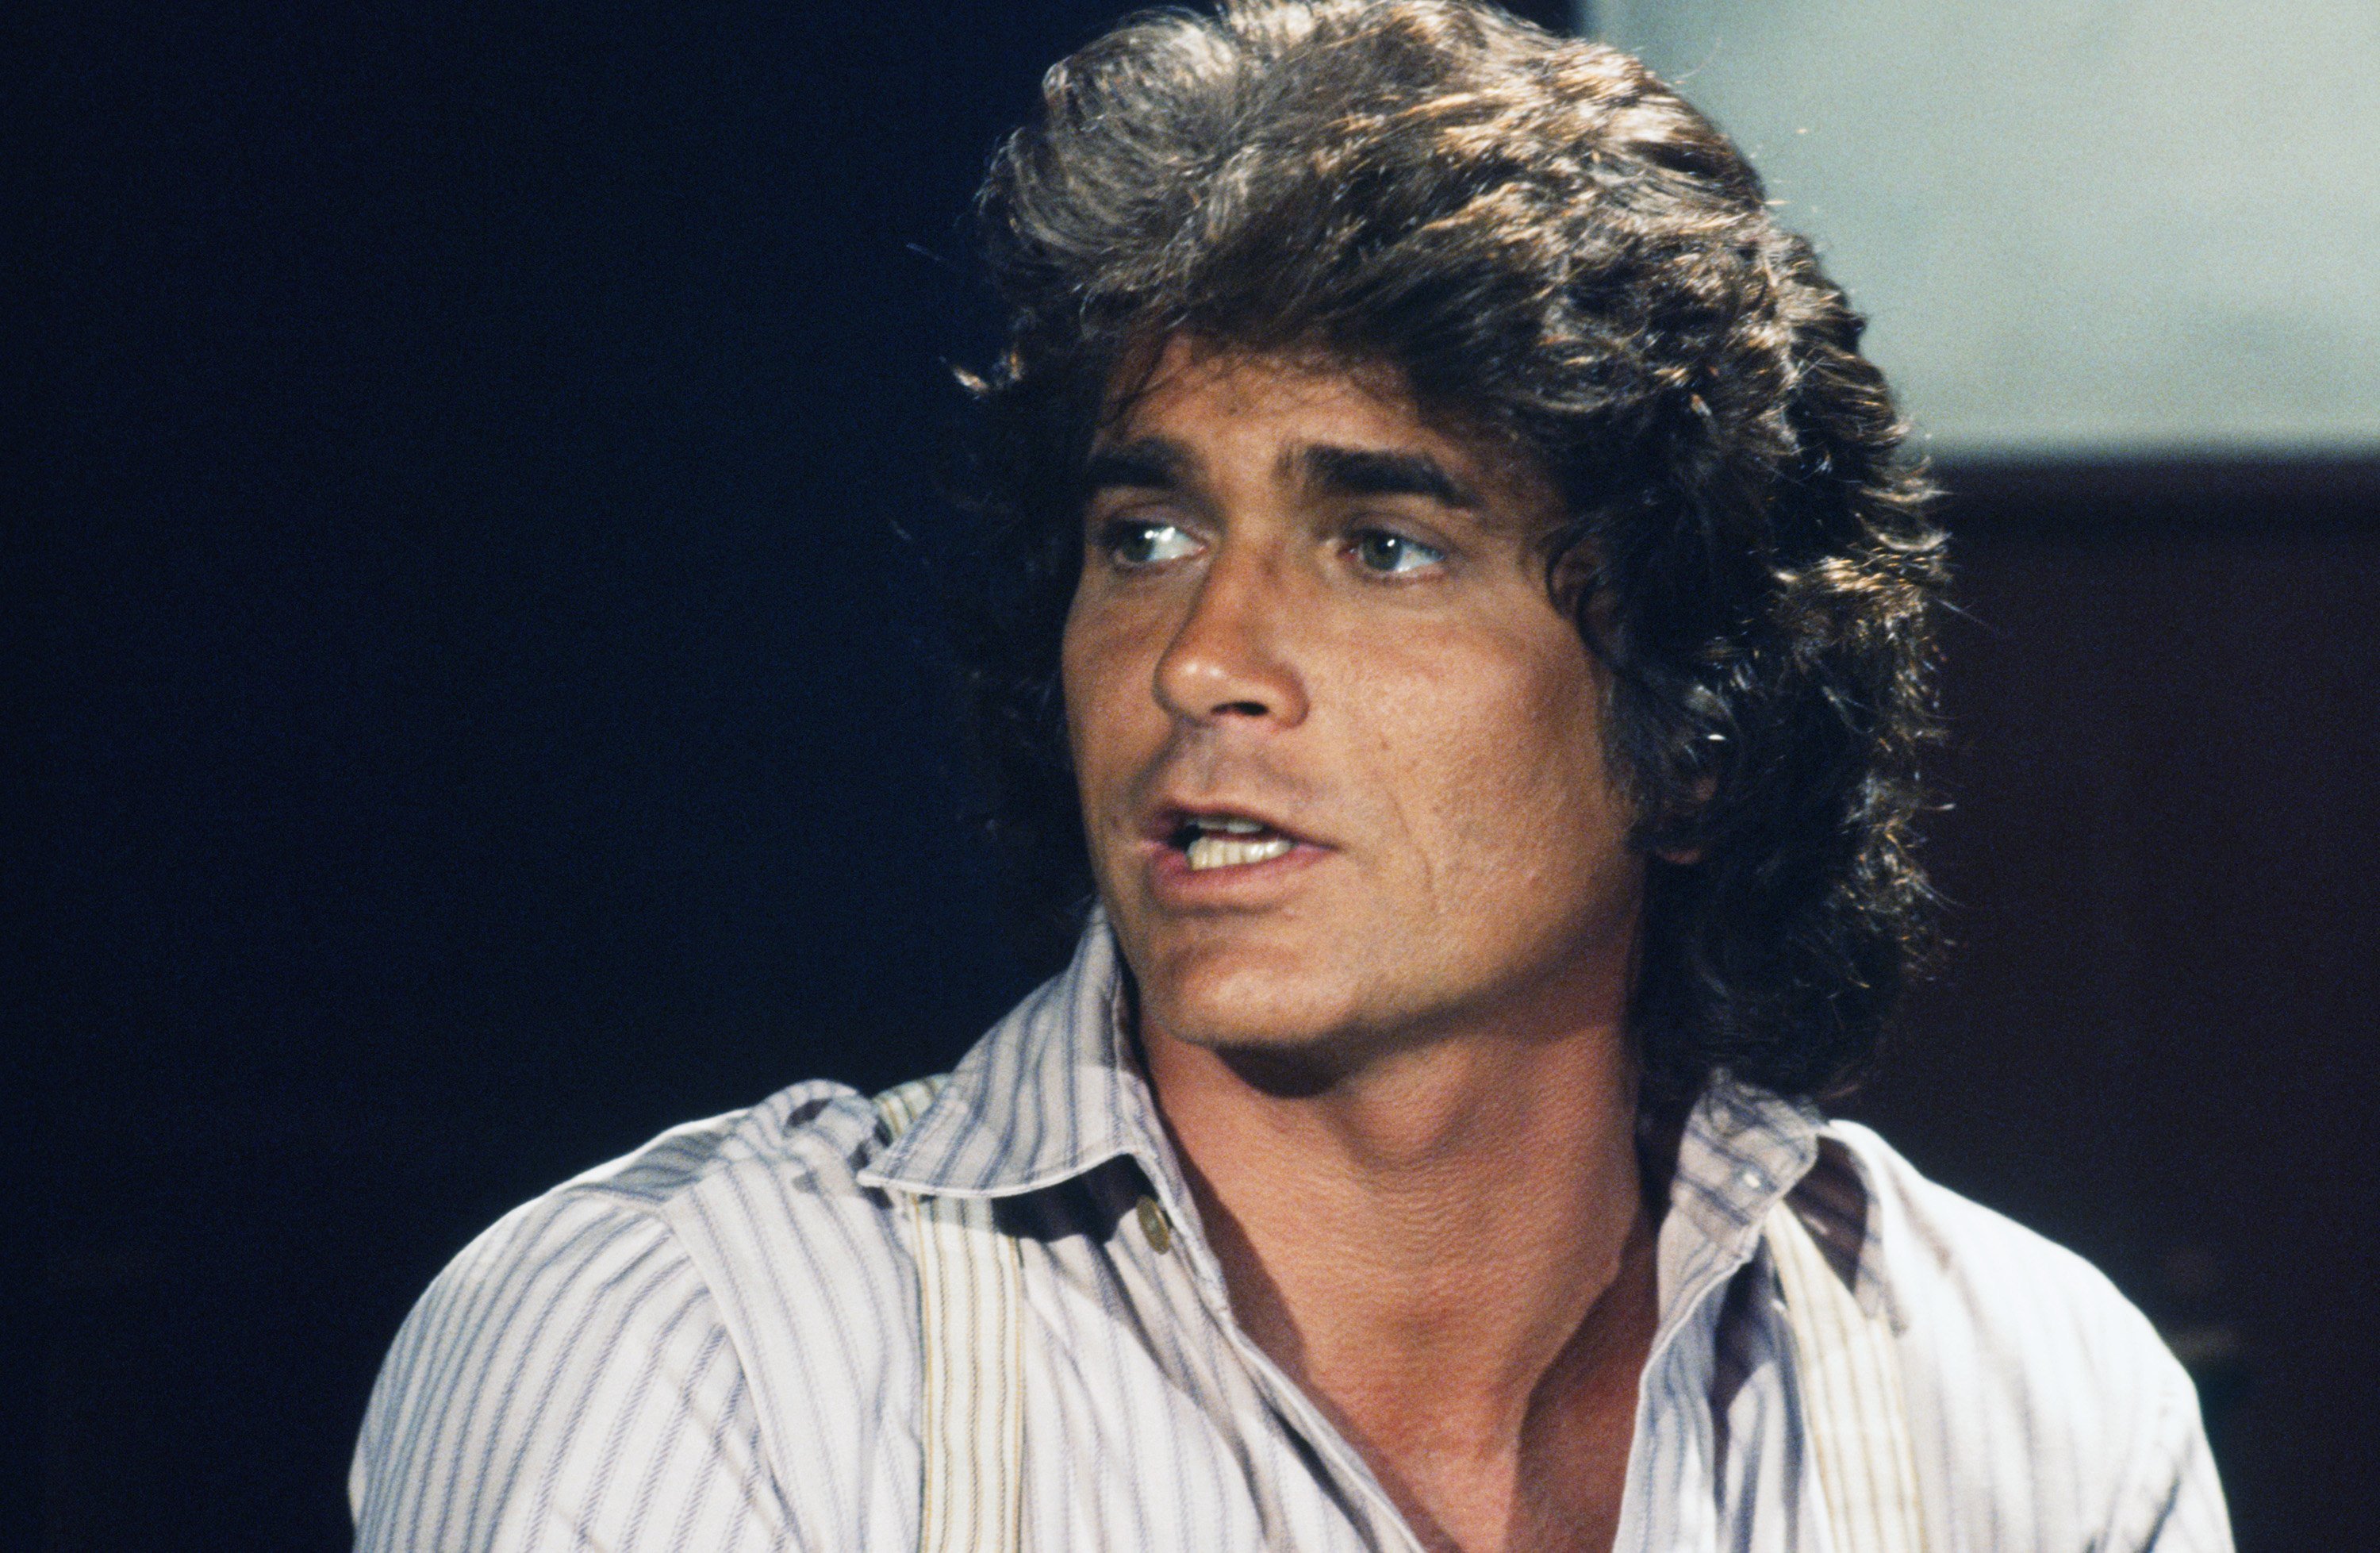 Michael Landon talks during a scene from Little House on the Prairie.